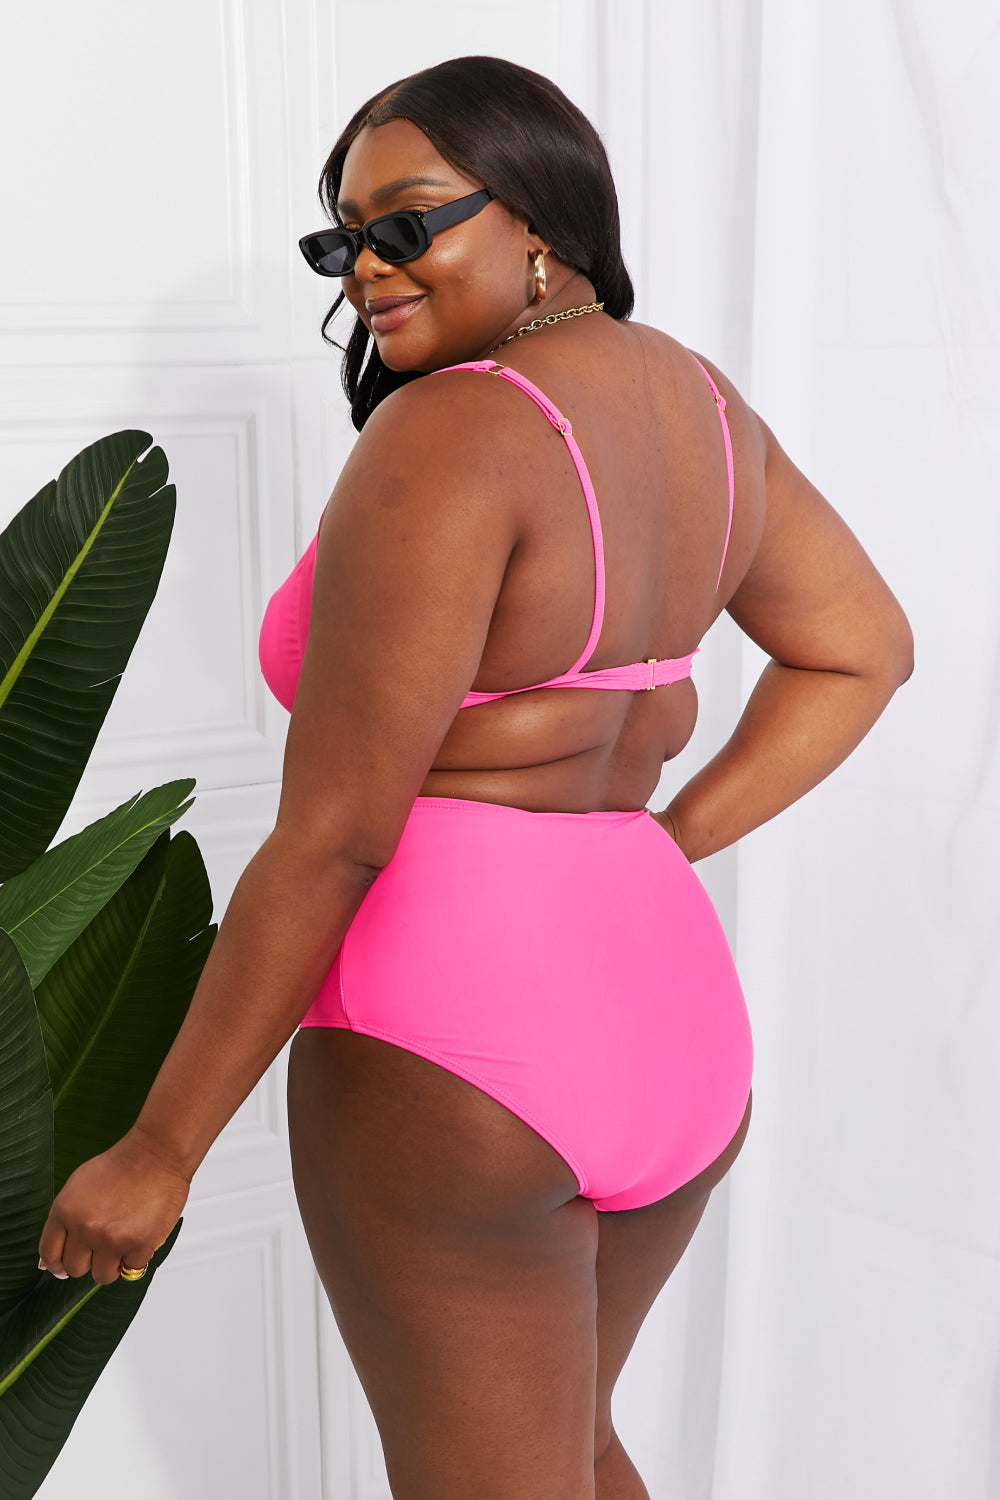 Get ready for a splash with Take A Dip Twist High-Rise Bikini in Pink! This flirty twist-front top and flattering high-rise bottoms are sure to satisfy all your summer cravings. With customizable removable pads, this suit will quickly become your go-to for beach days. Note: Runs small, order one size up. If between sizes, please size up. Models are wearing sizes S and 2XL.